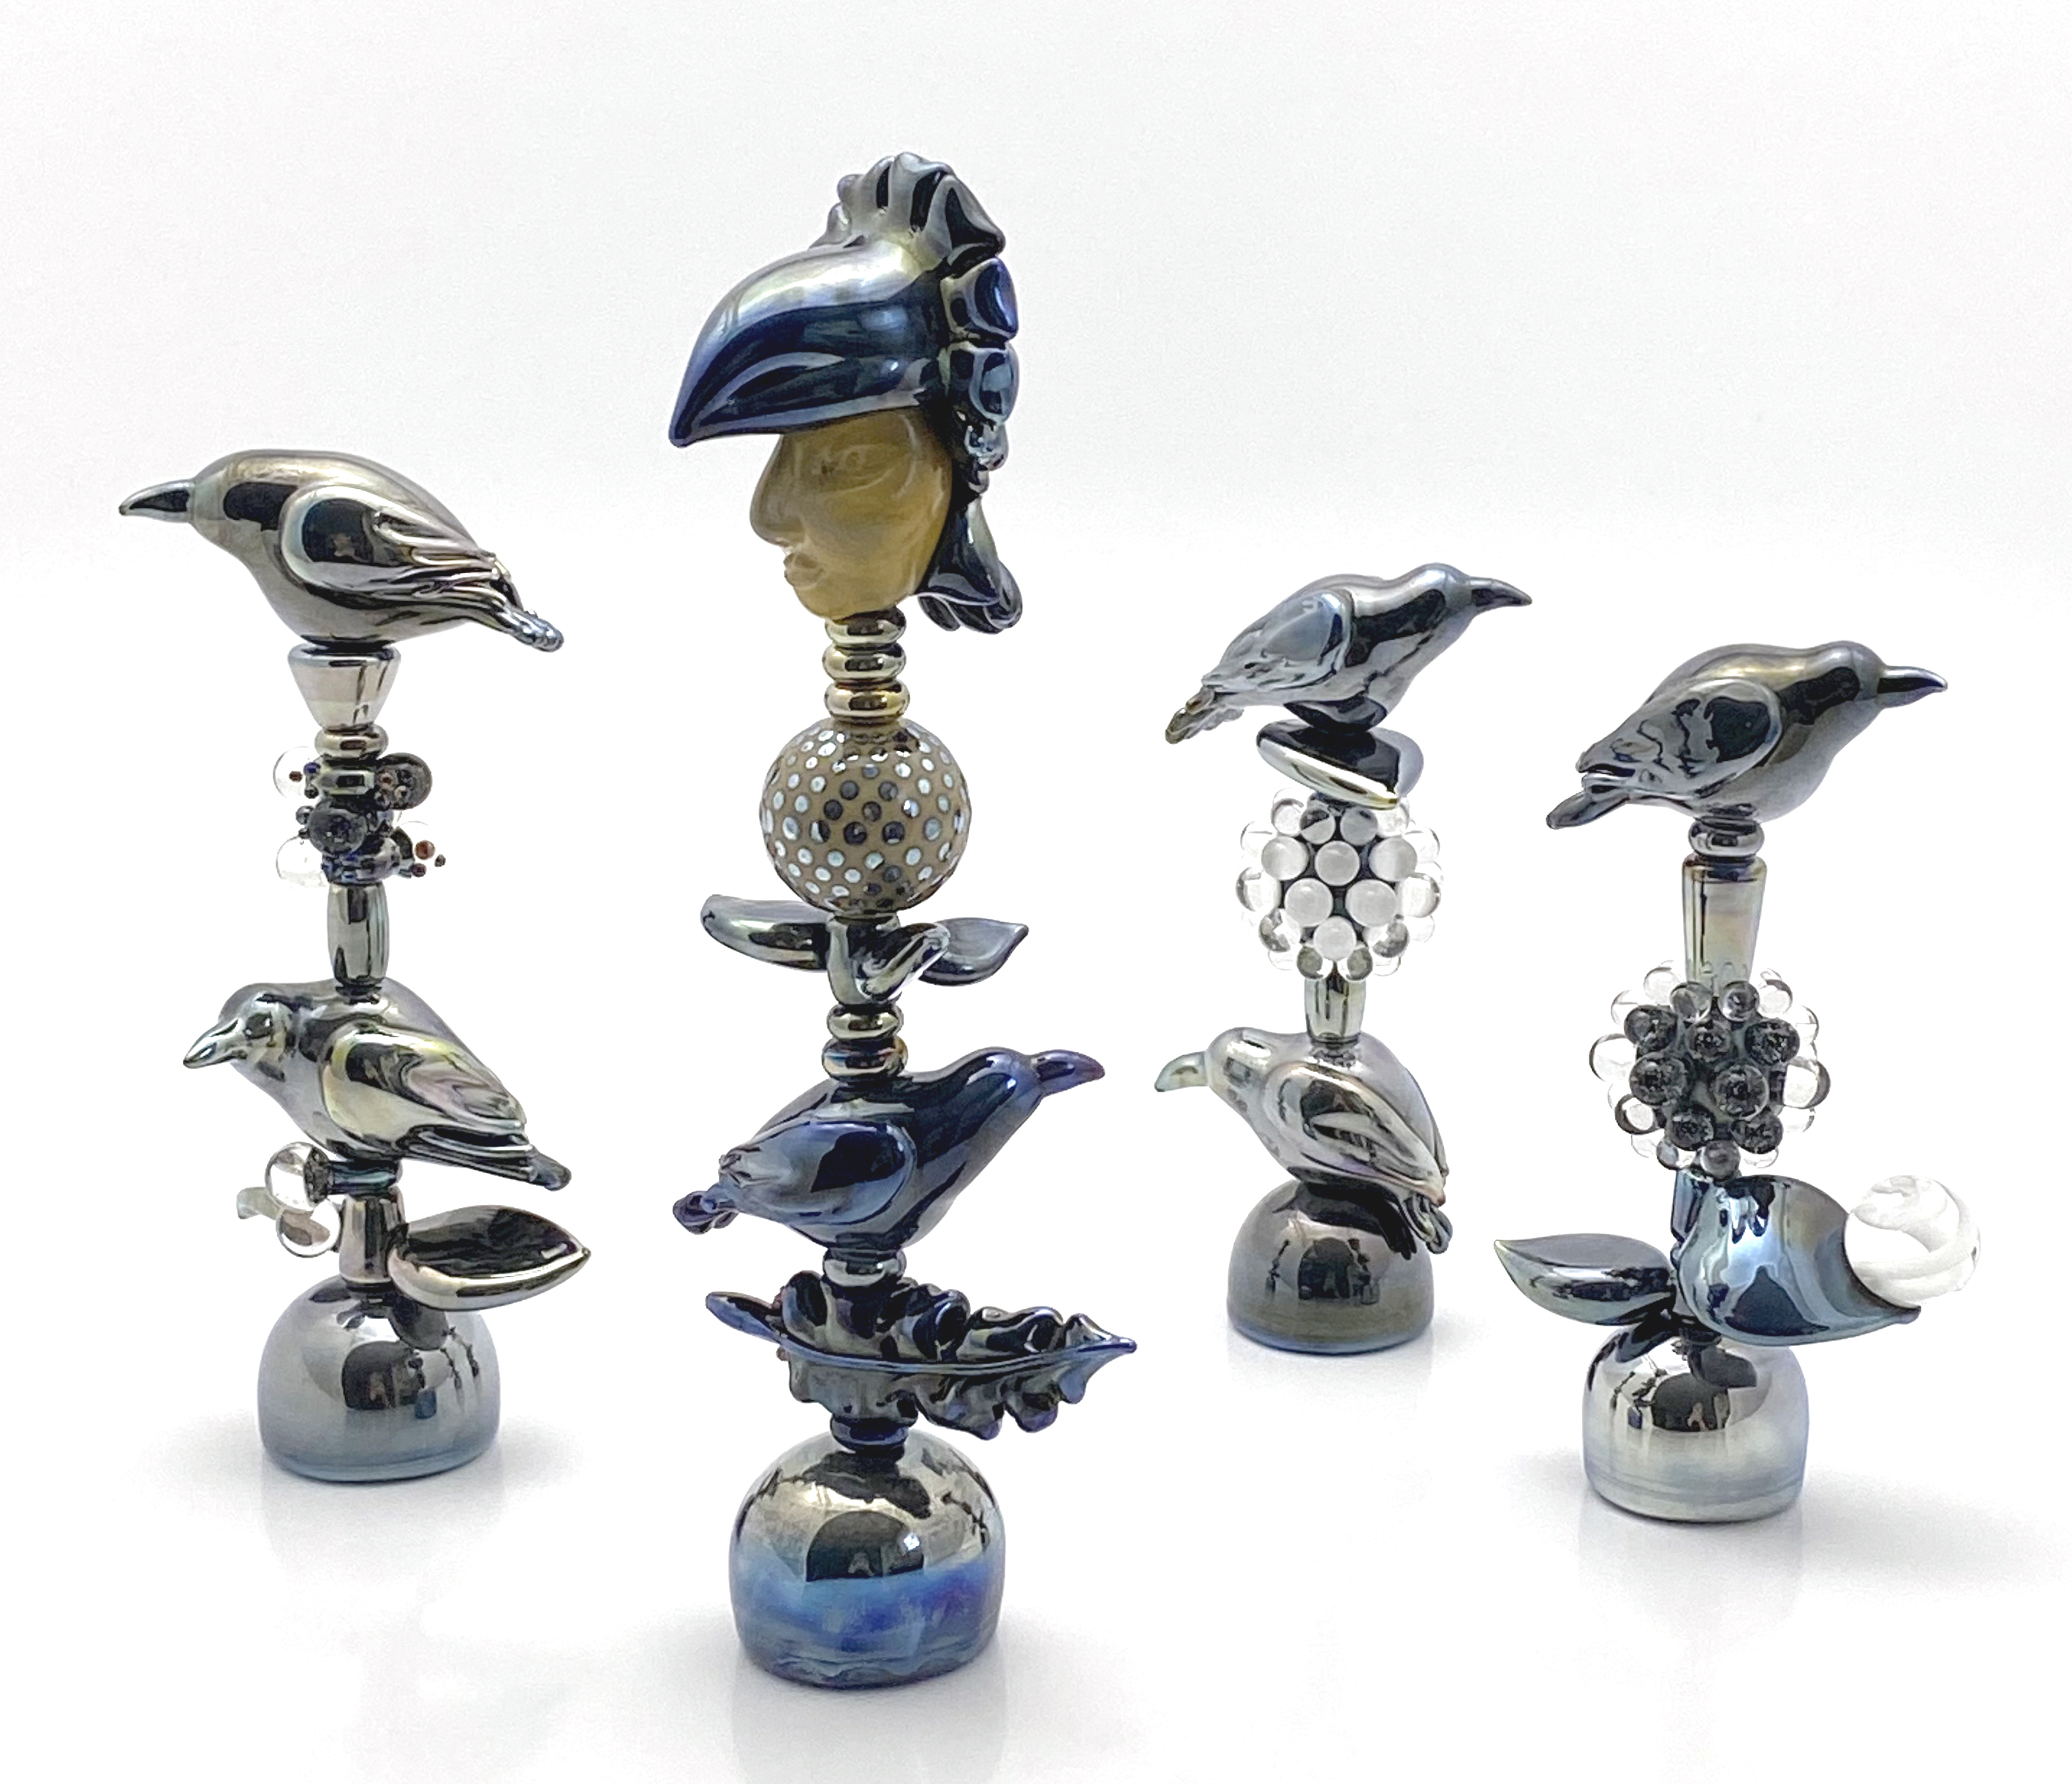 Sculptural Art Totems created by Liliana Glenn, dedicated to the Corvus Species.